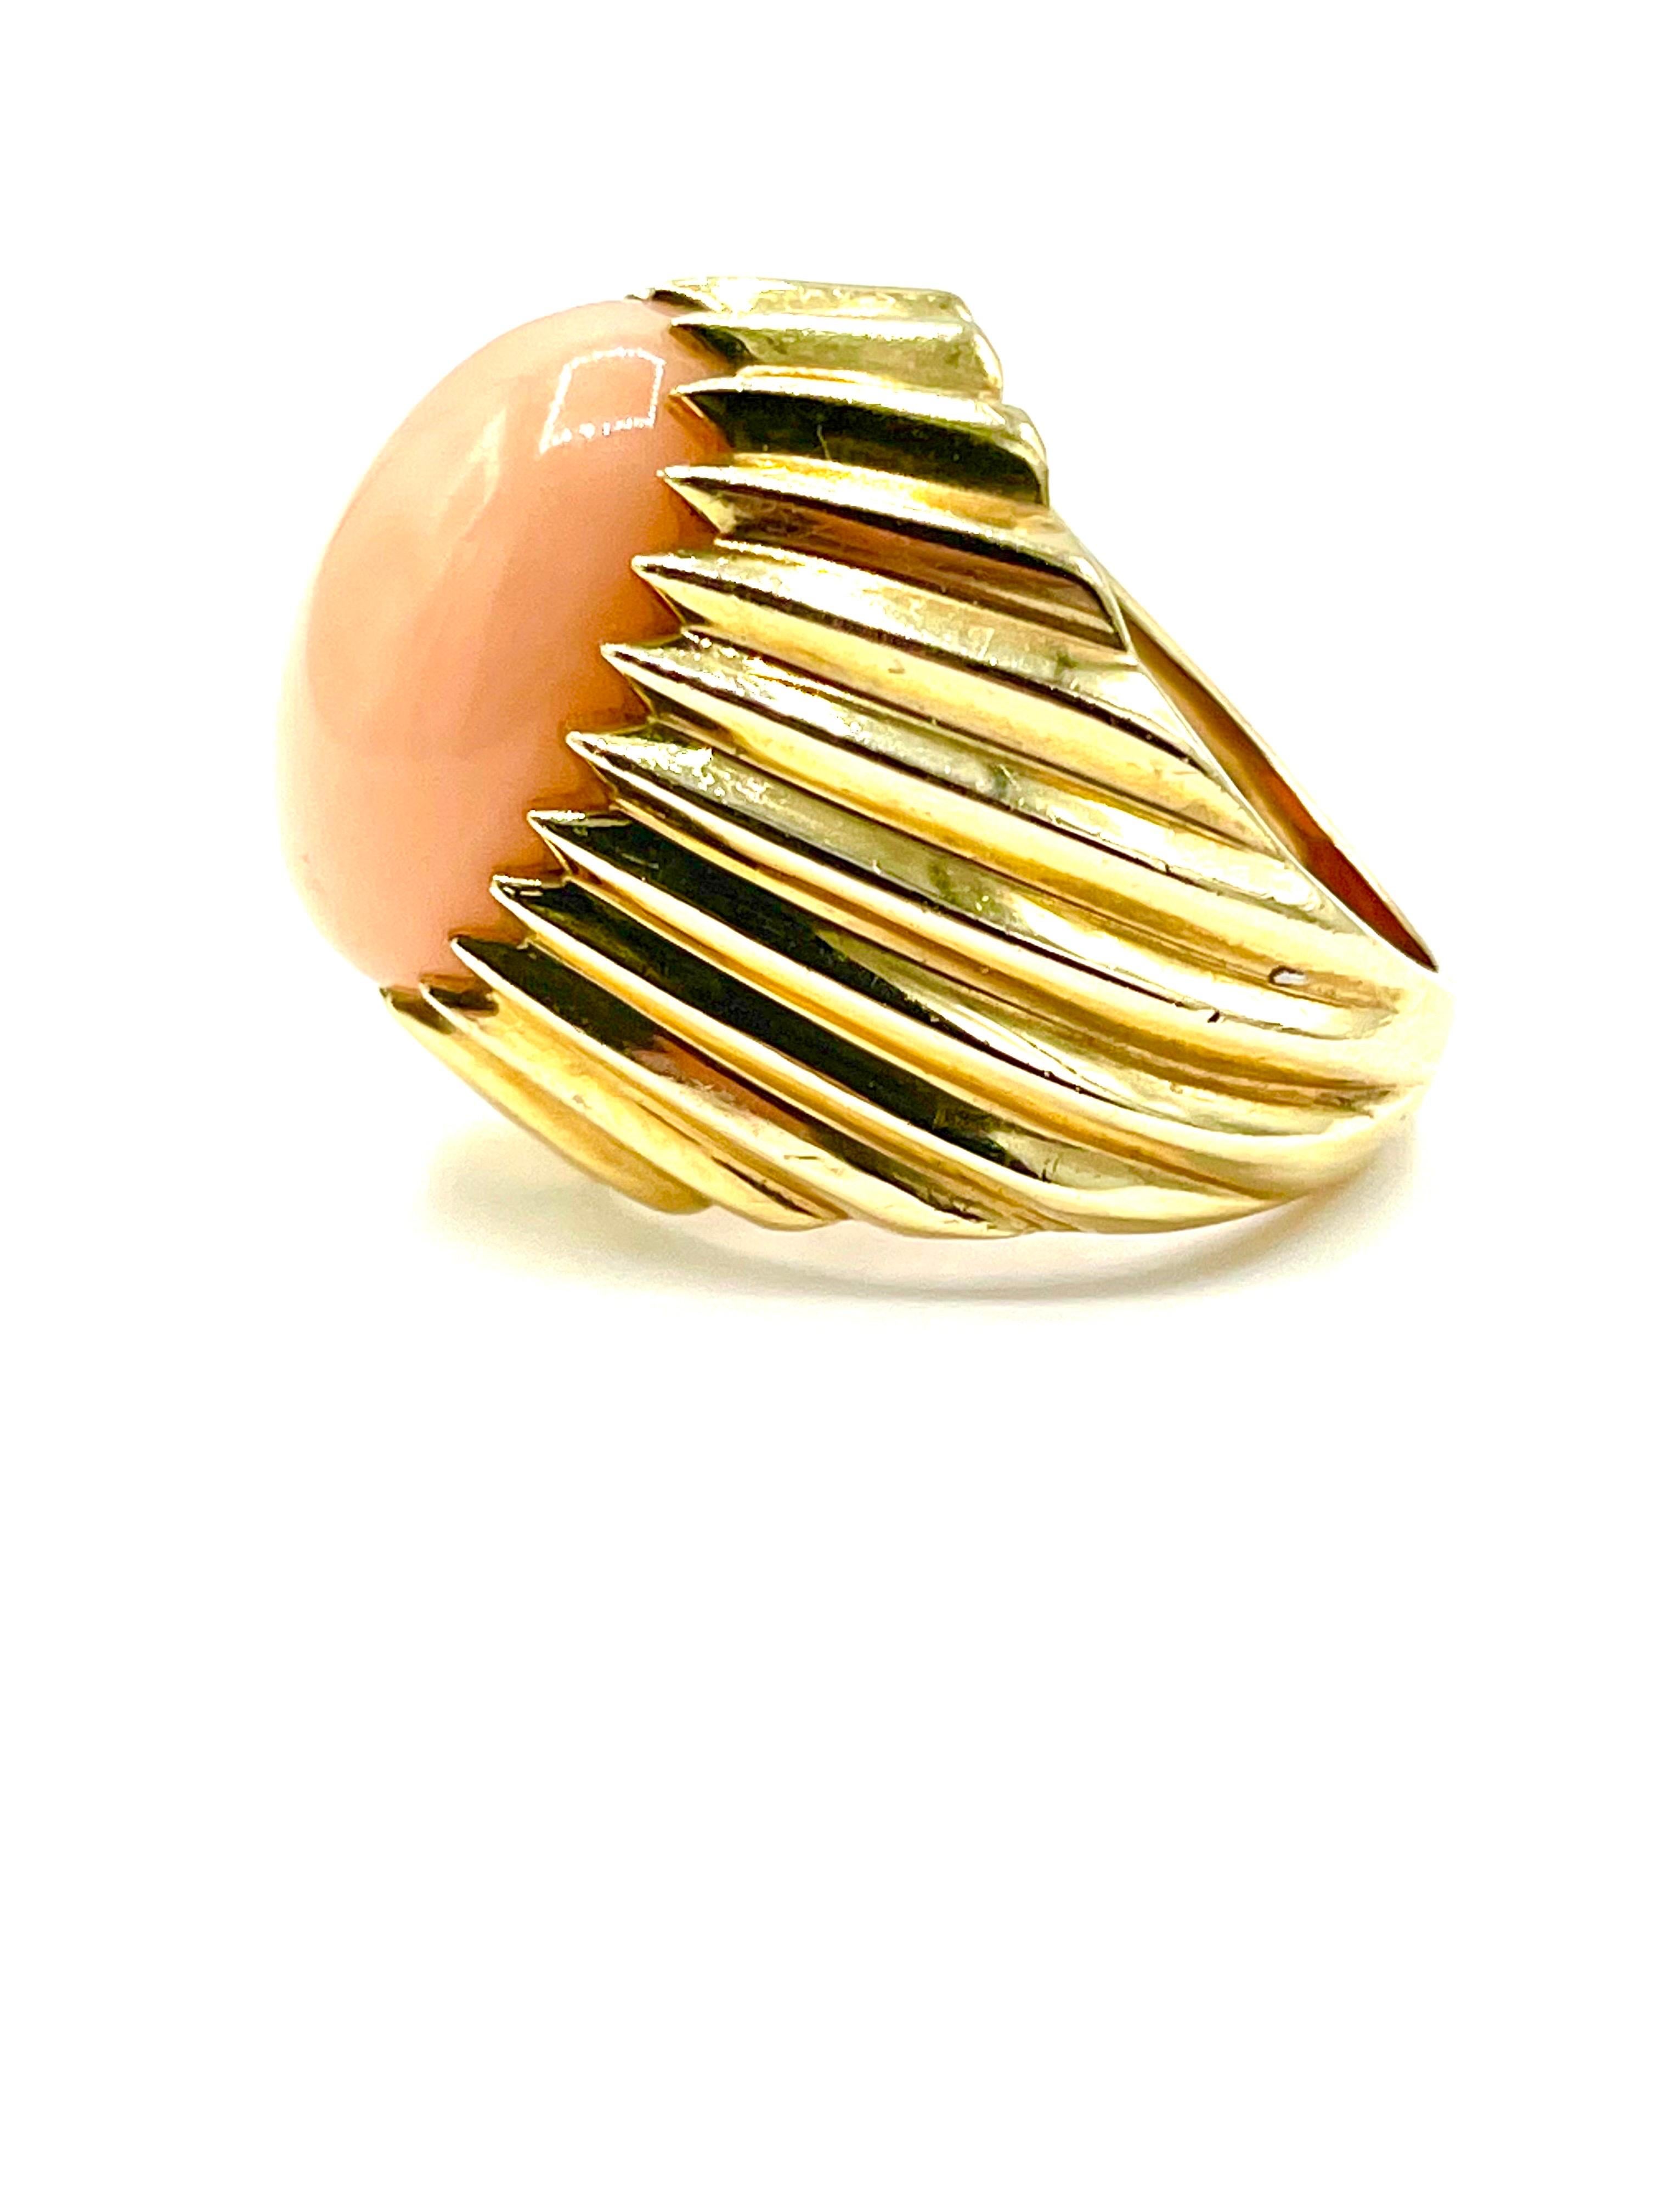 Retro Cabochon Angel Skin Coral Bombe' Style Yellow Gold Cocktail Ring For Sale